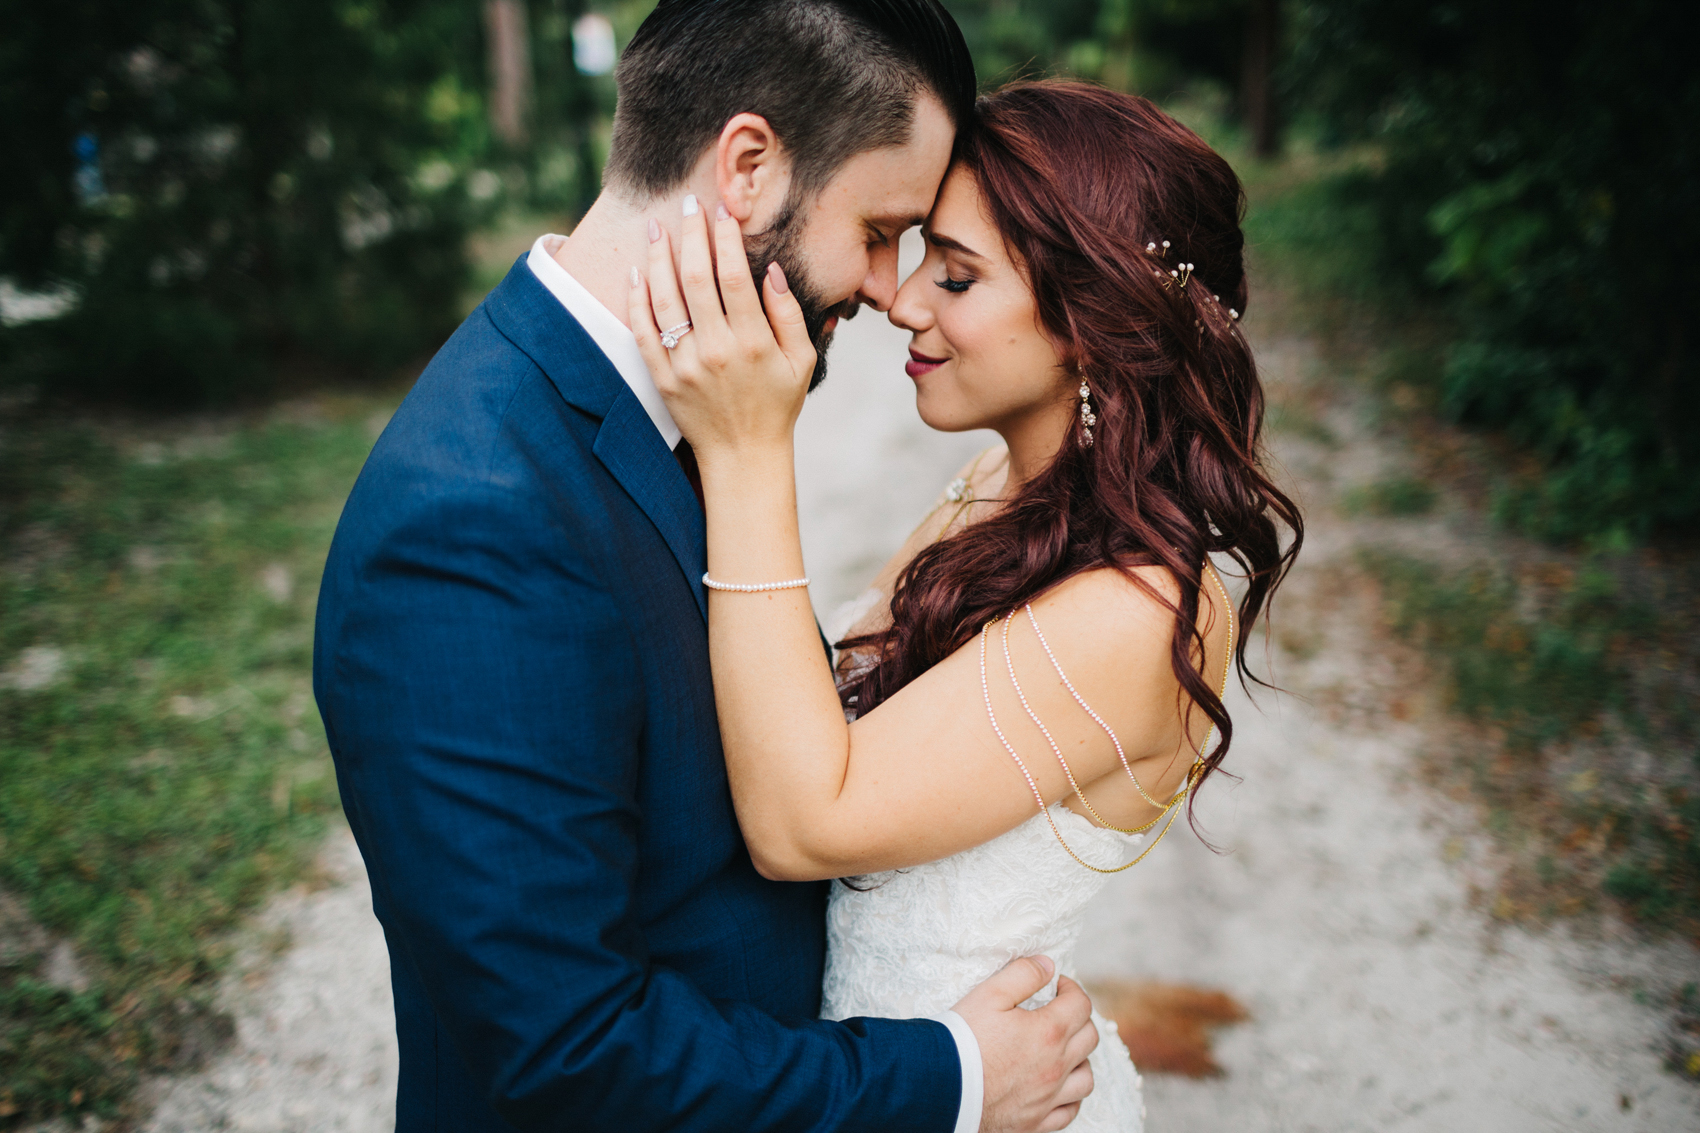 Sweet moment between the bride and groom before their Winter Park Farmers Market wedding reception